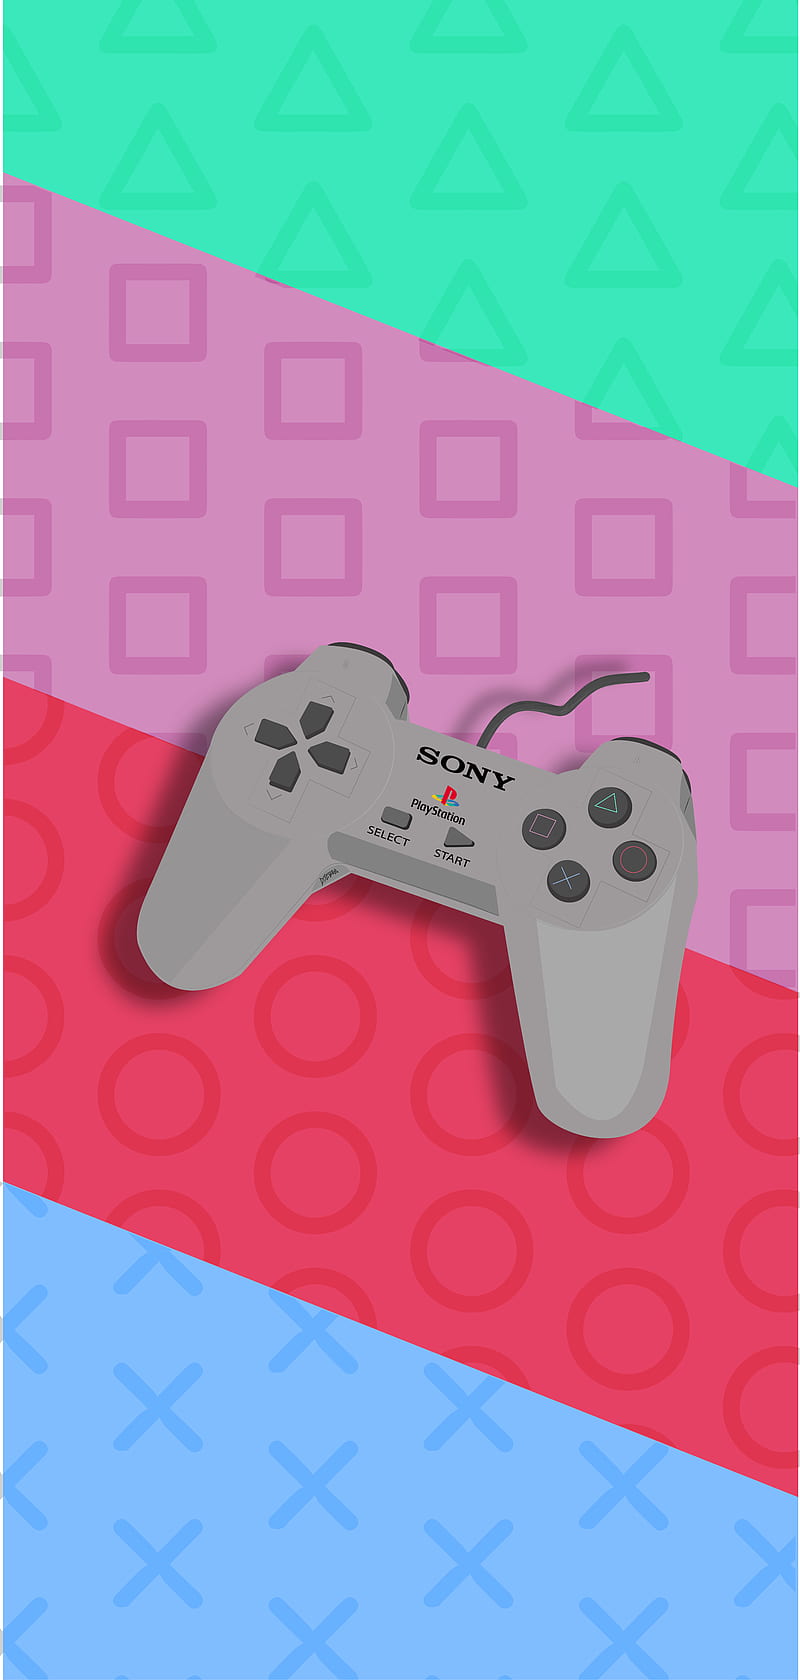 Ps1 Controller Gaming Playstation Ps1 Ps2 Ps3 Ps4 Psone Psx Retro Sony Hd Mobile Wallpaper Peakpx